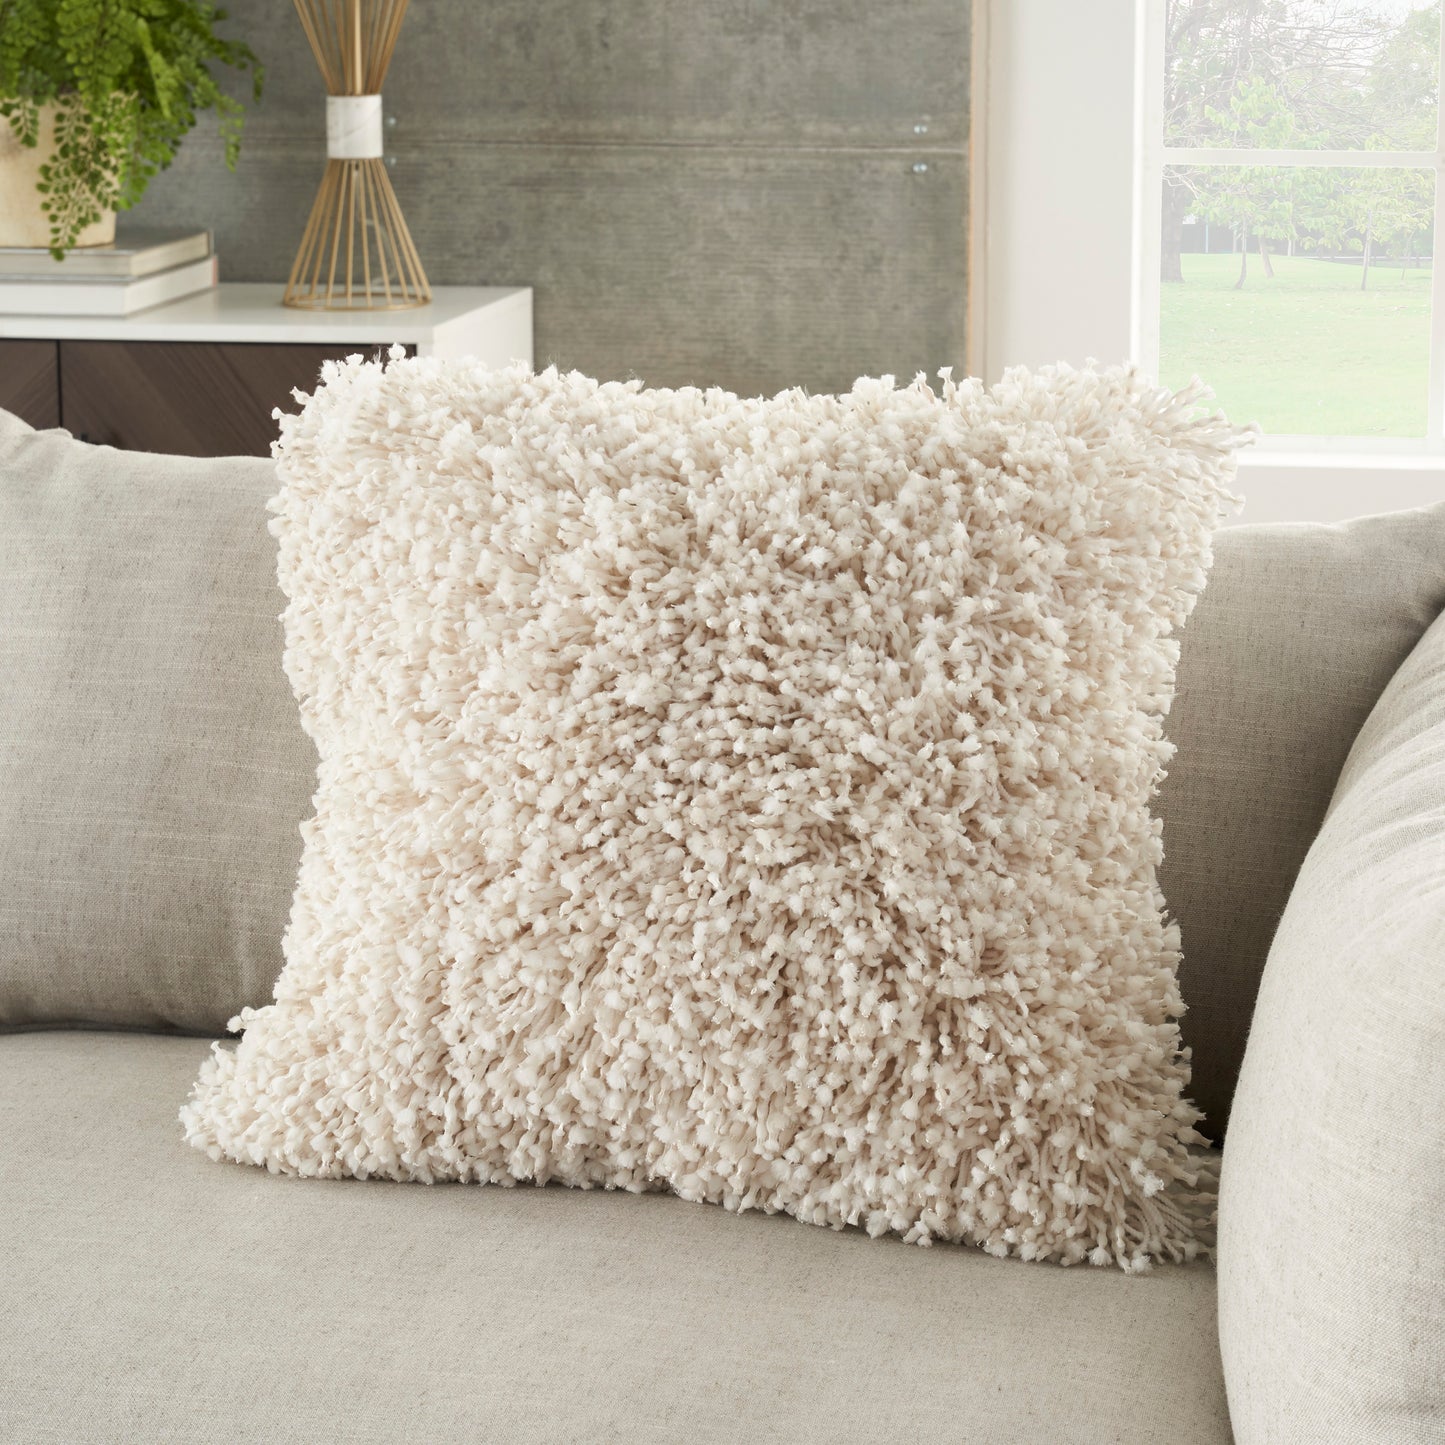 Shag TL050 Synthetic Blend Space Dyed Shag Throw Pillow From Mina Victory By Nourison Rugs